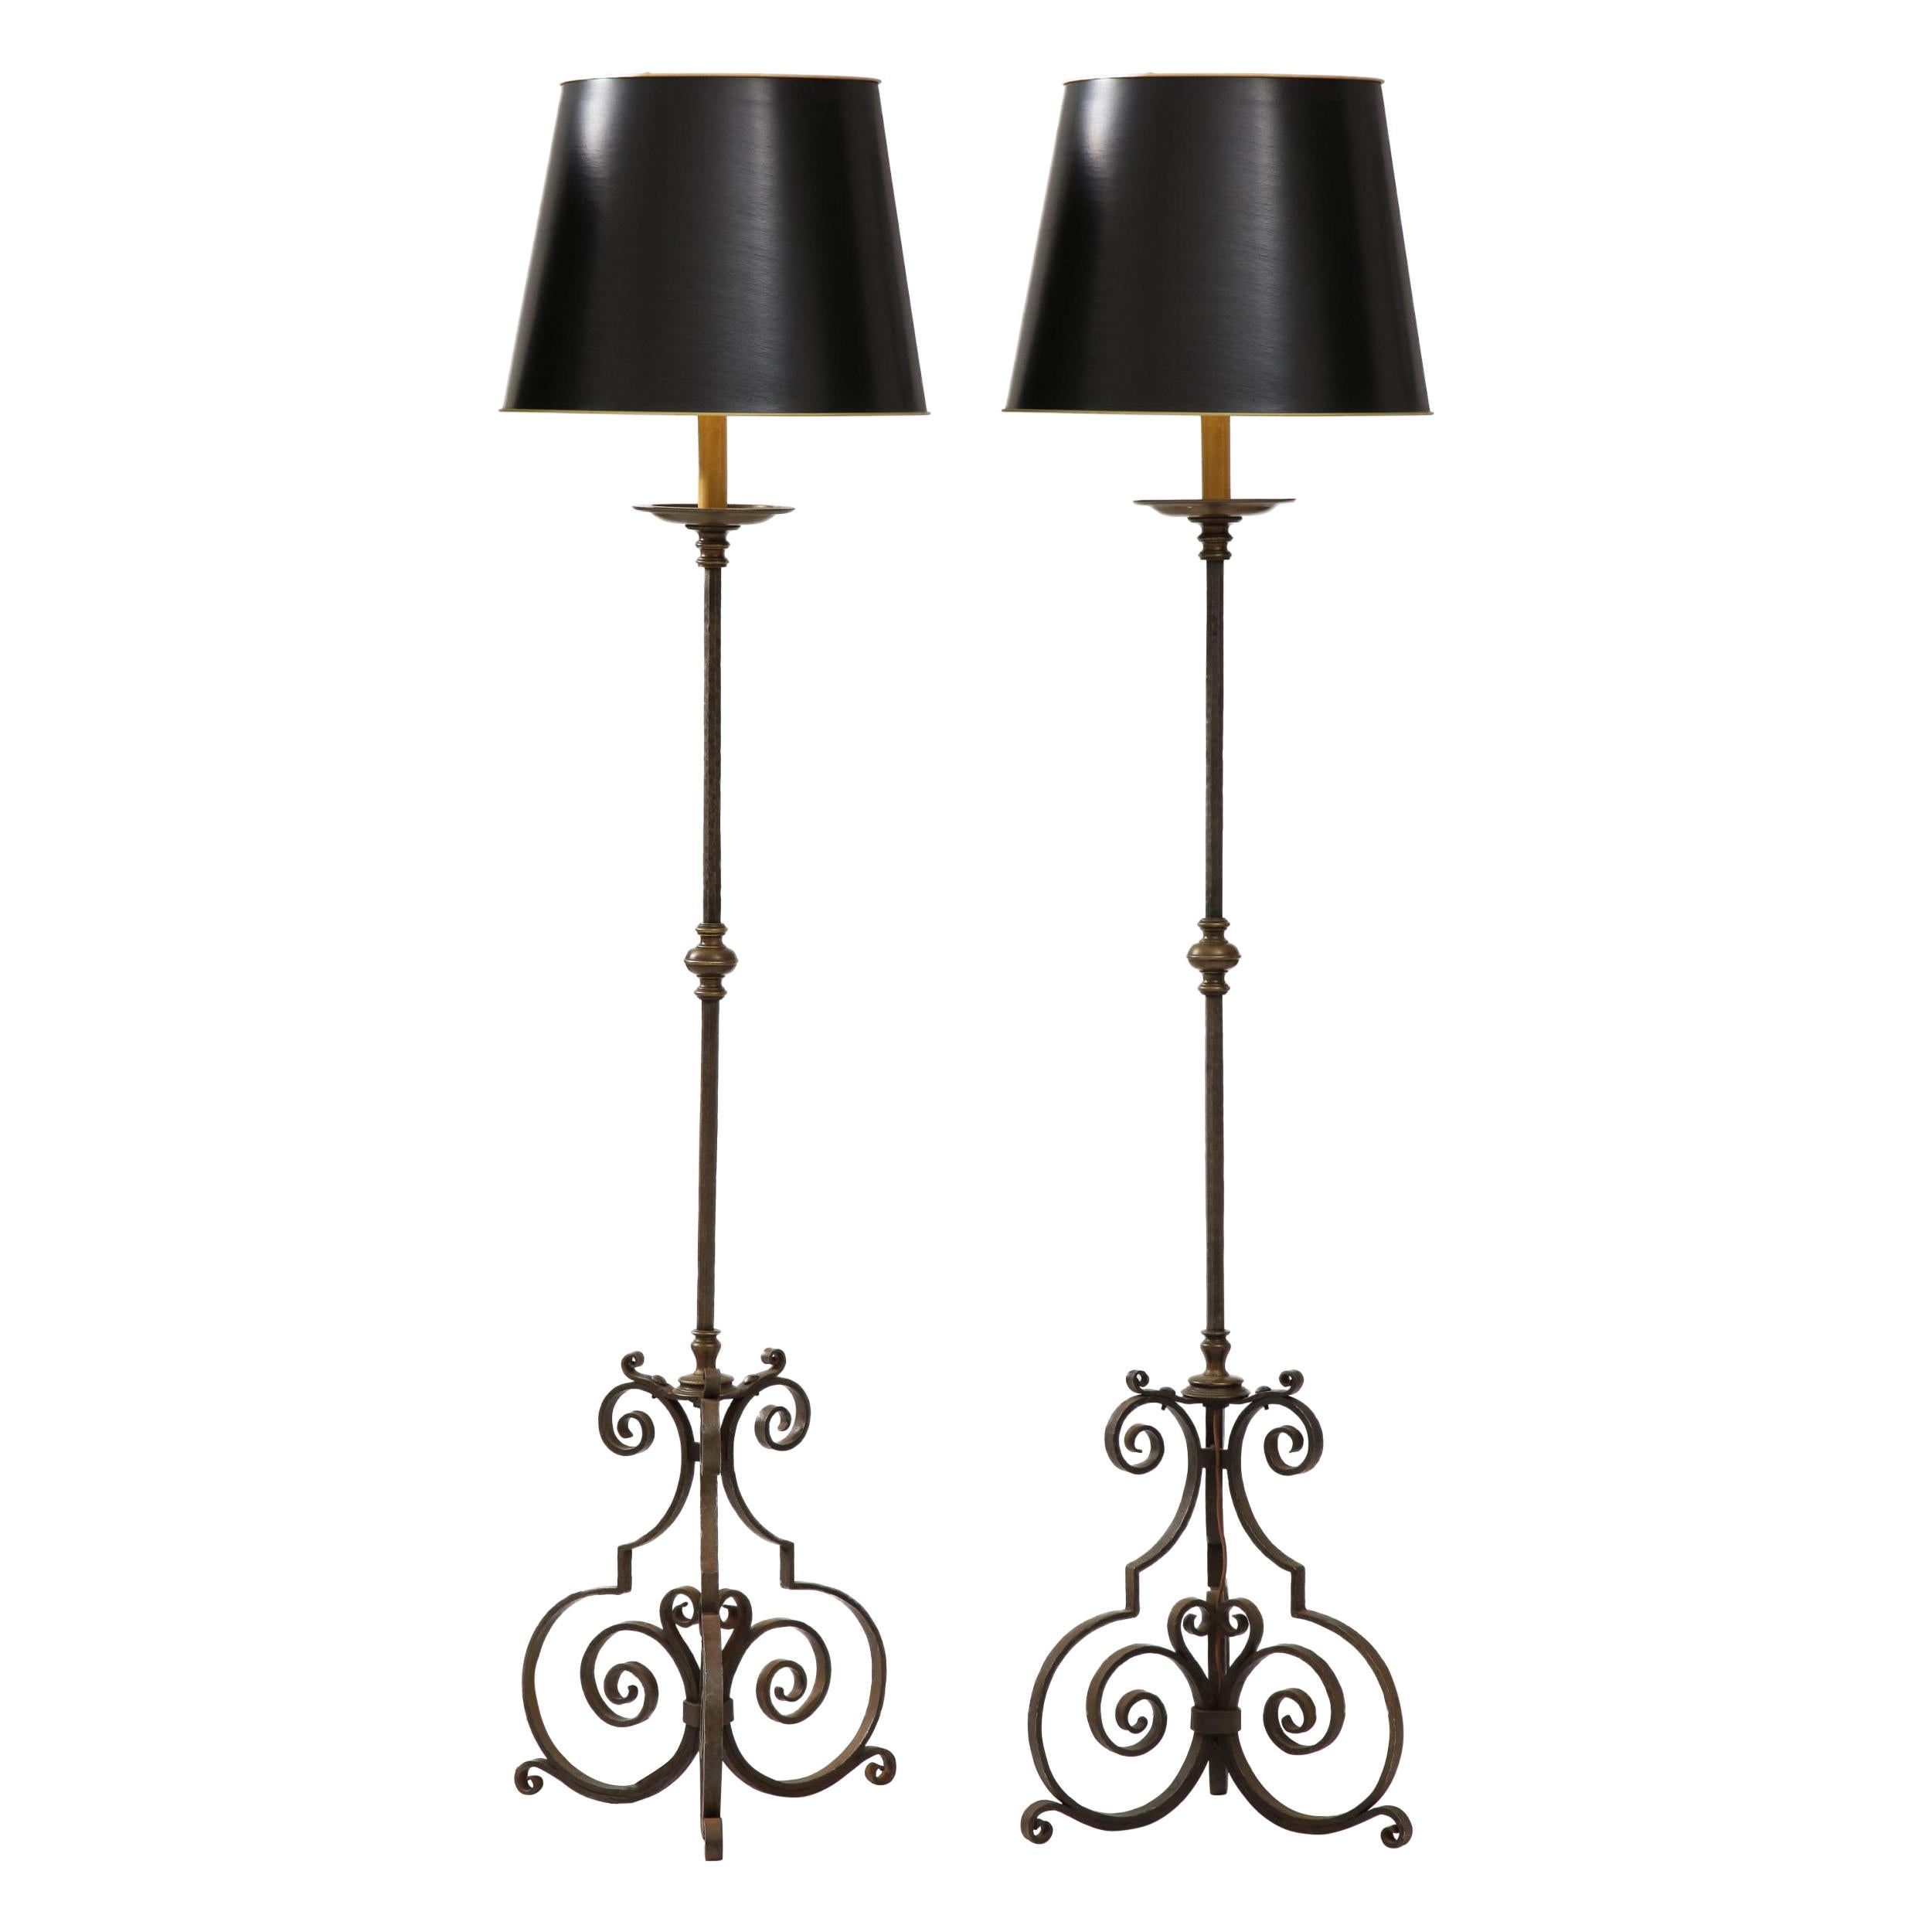 Pair of Wrought Iron and Brass Floor Lamps